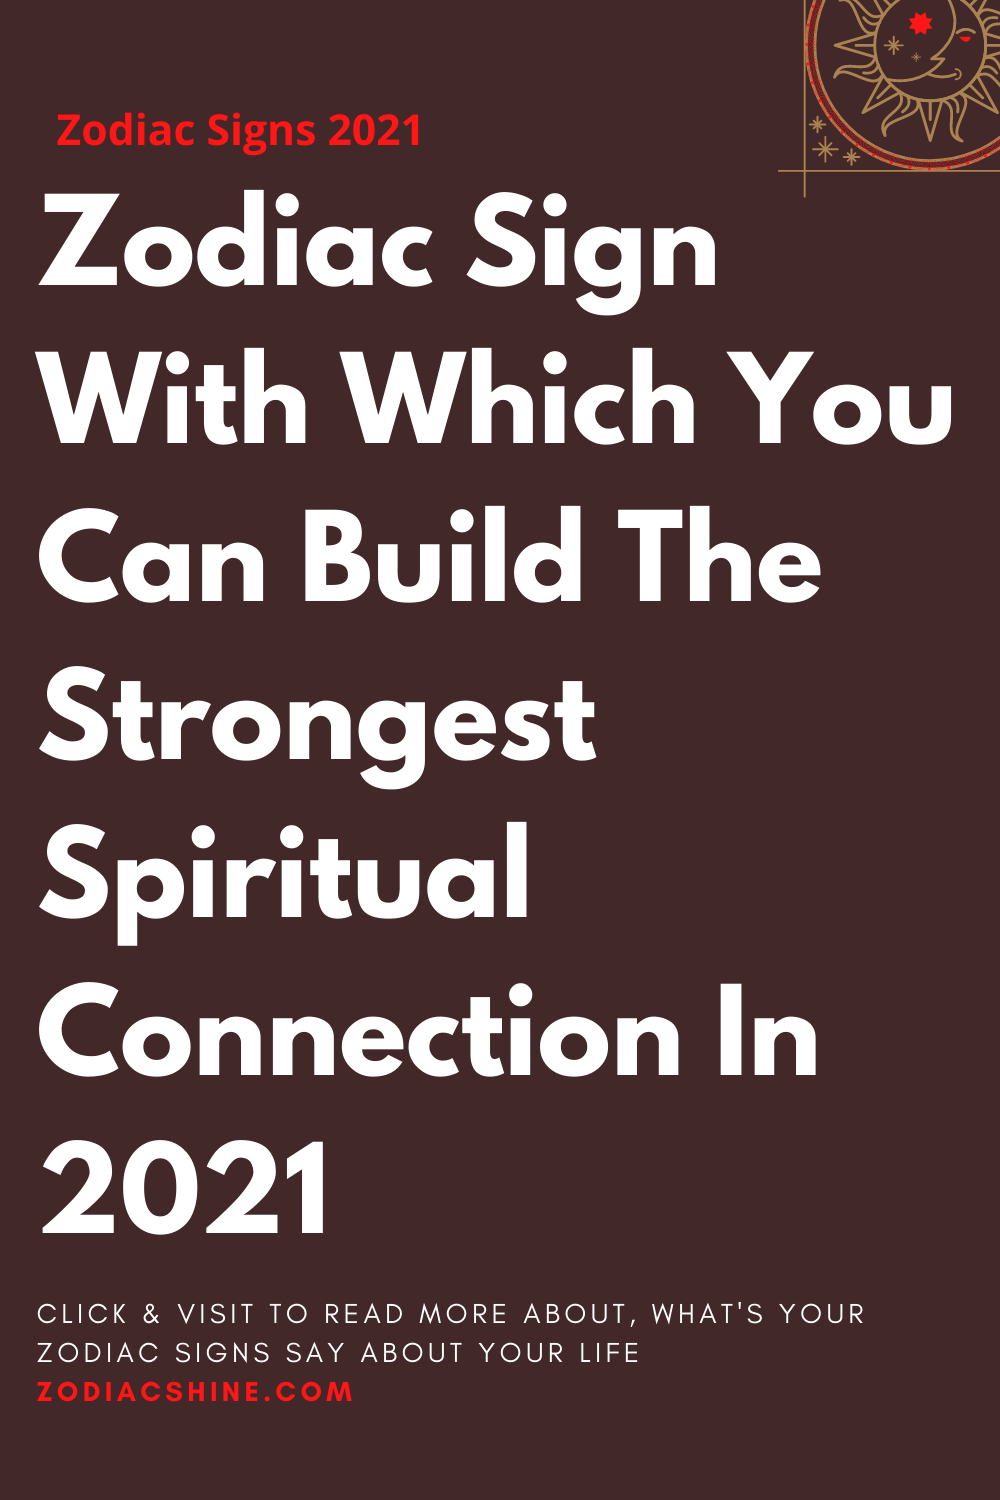 Zodiac Sign With Which You Can Build The Strongest Spiritual Connection In 2021